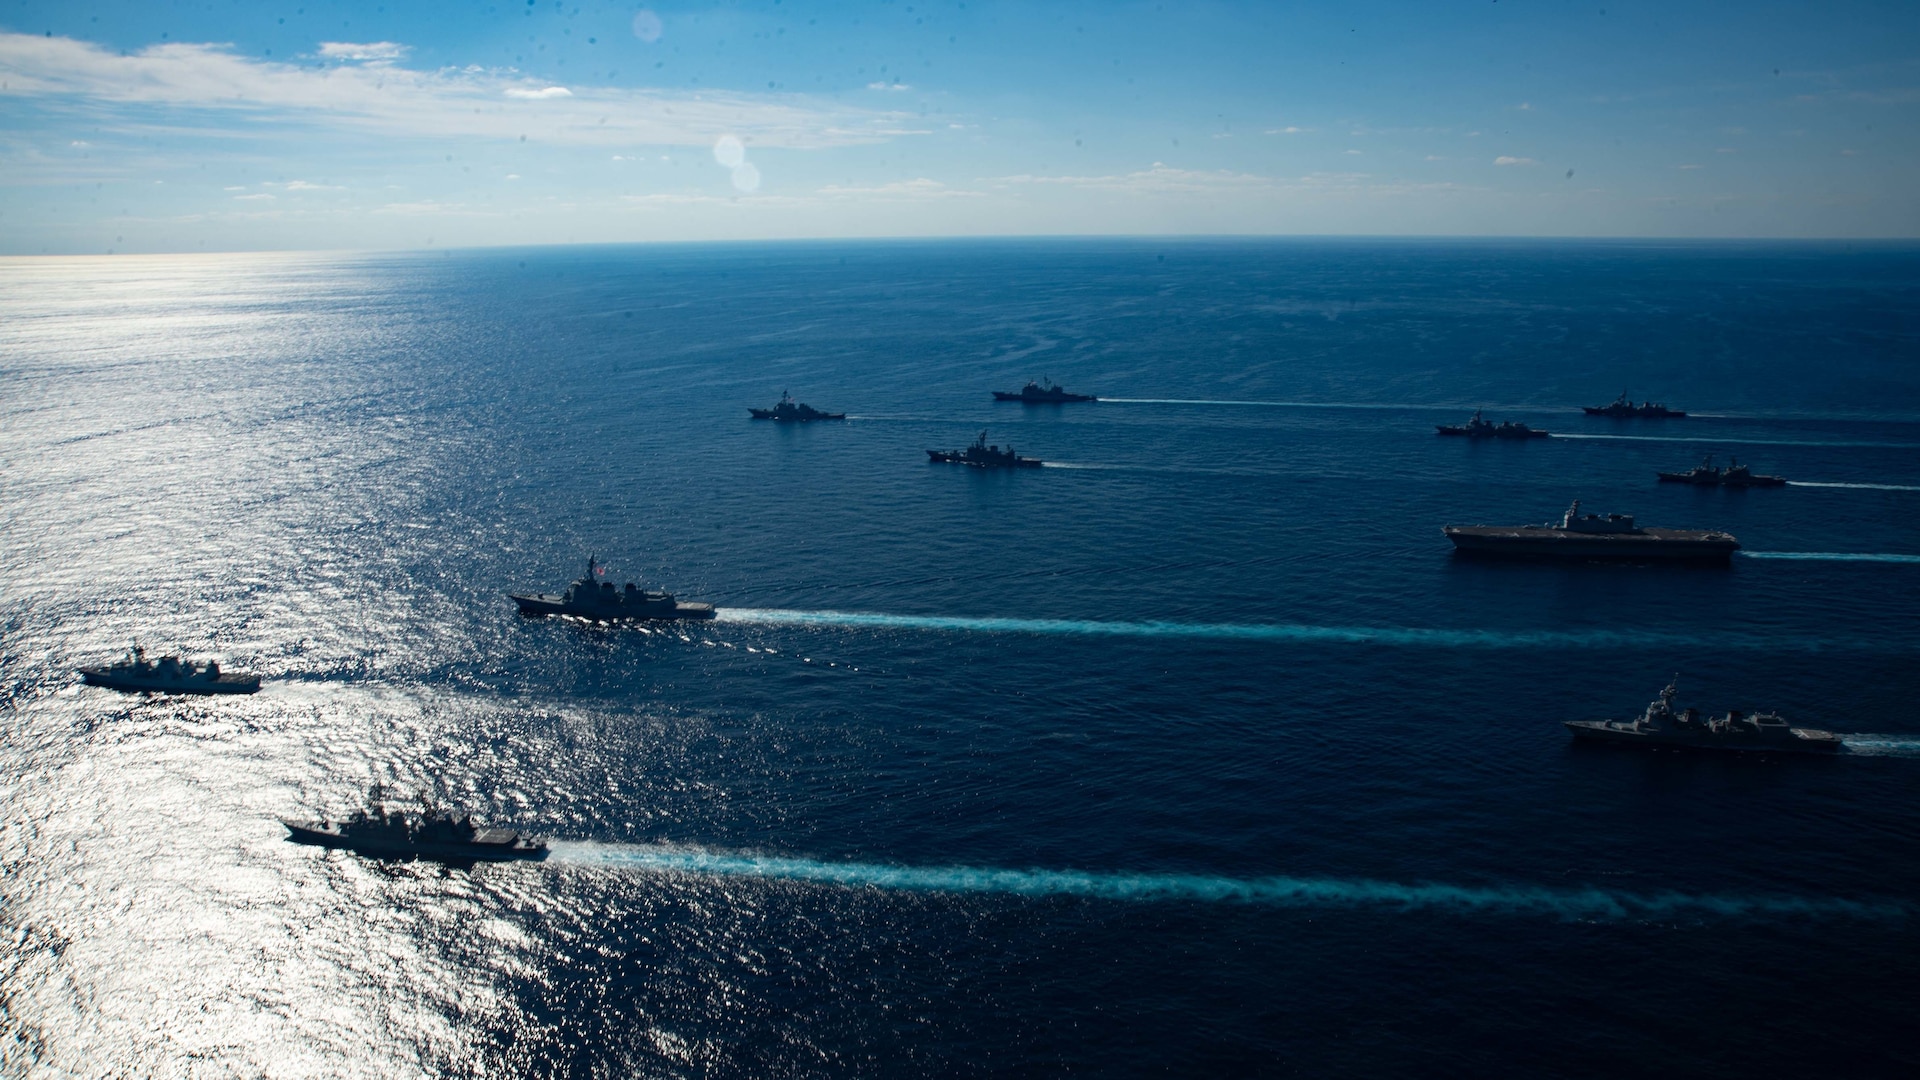 U.S. Navy ships assigned to the Ronald Reagan Carrier Strike Group joined ships of Japan Maritime Self-Defense Force (JMSDF) Escort Flotilla 1, Escort Flotilla 4, and the Royal Canadian Navy in formation during Keen Sword 21.